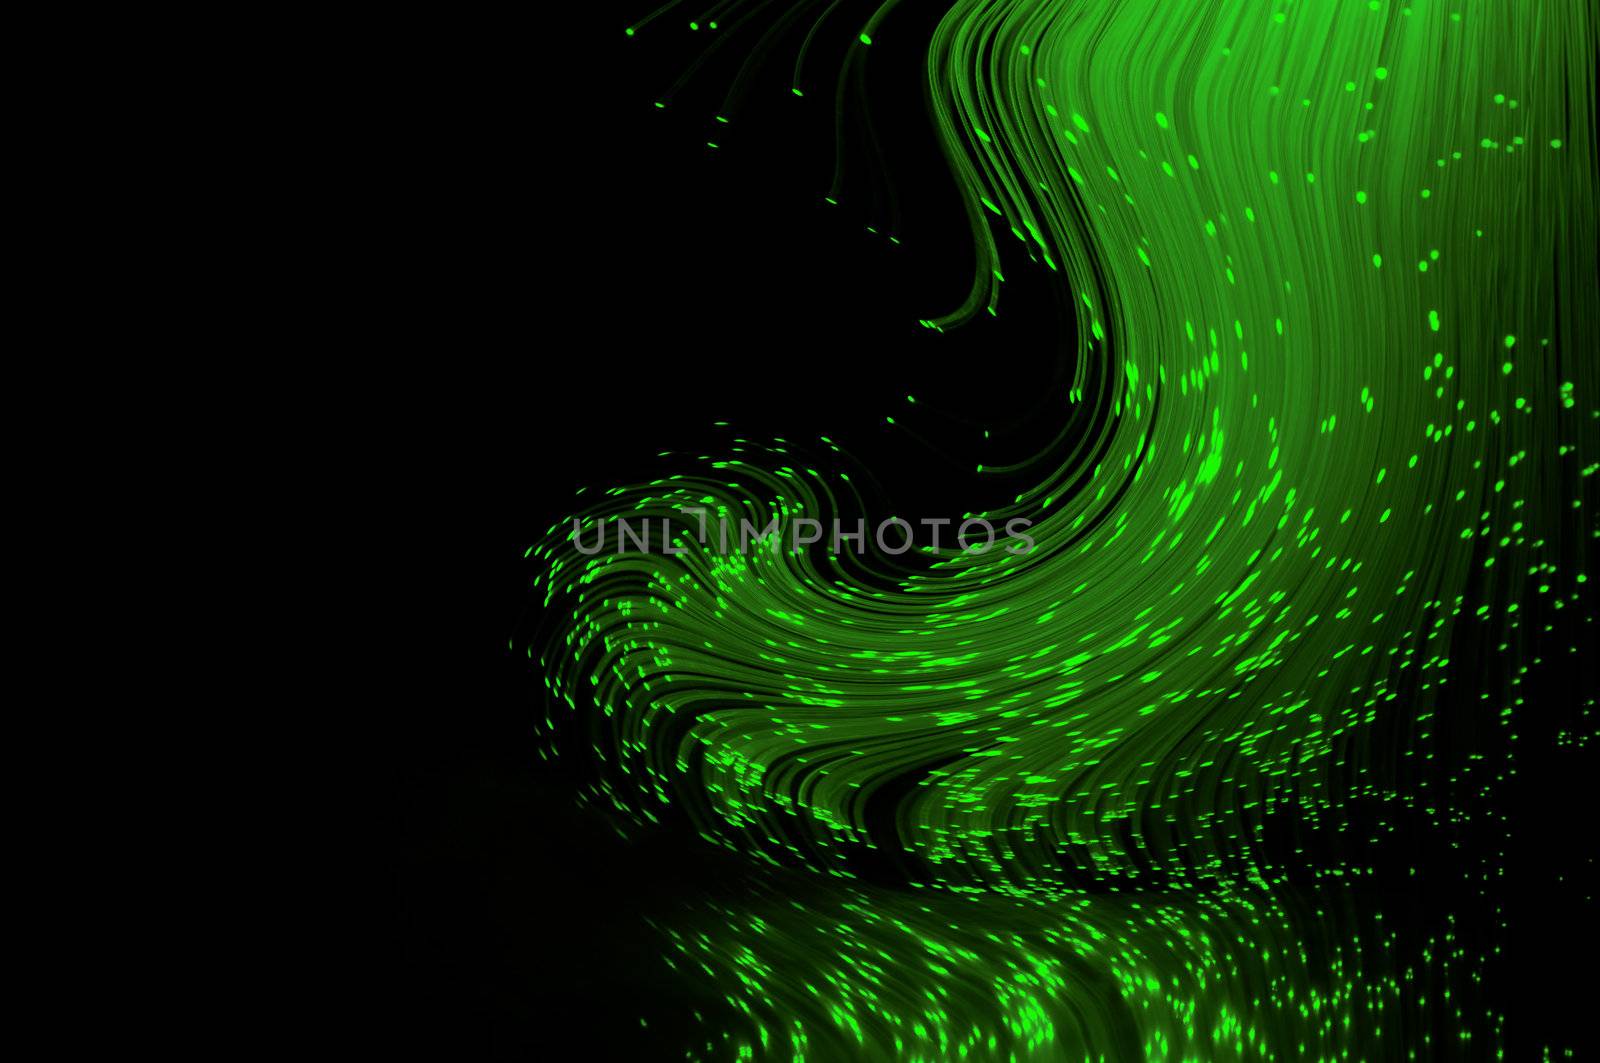 Bright green fiber optic light strands swirling against a black background and reflecting into the foreground.